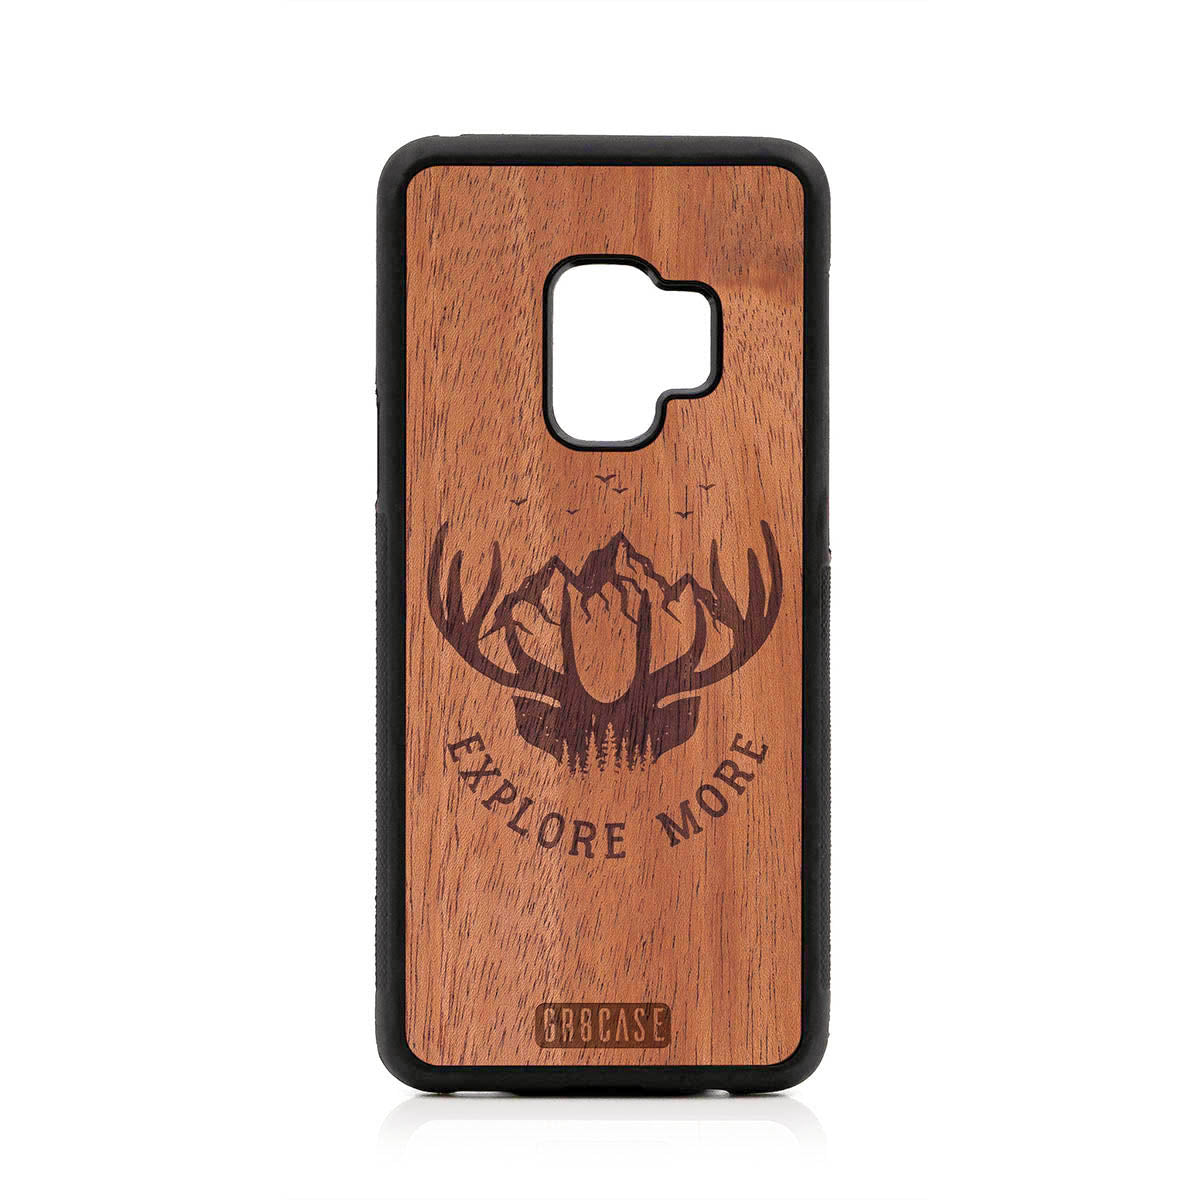 Explore More (Forest, Mountains & Antlers) Design Wood Case For Samsung Galaxy S9 by GR8CASE